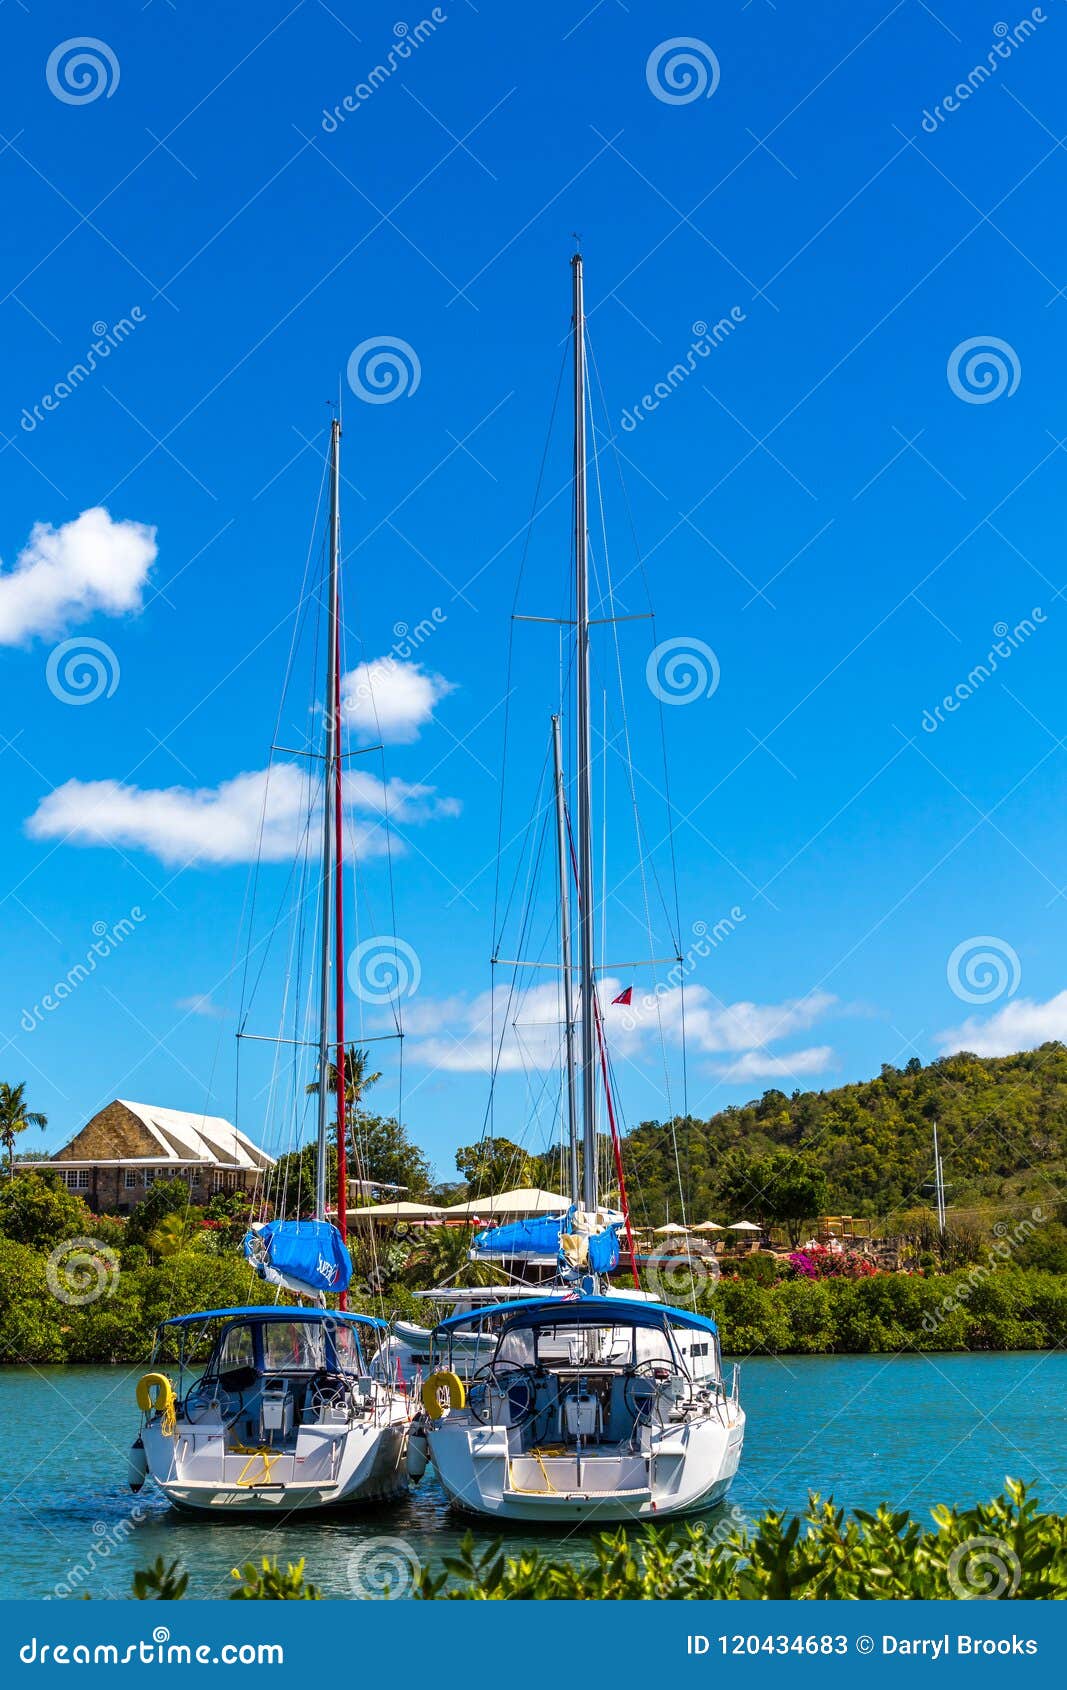 two sailboats leave a harbor in the bahamas